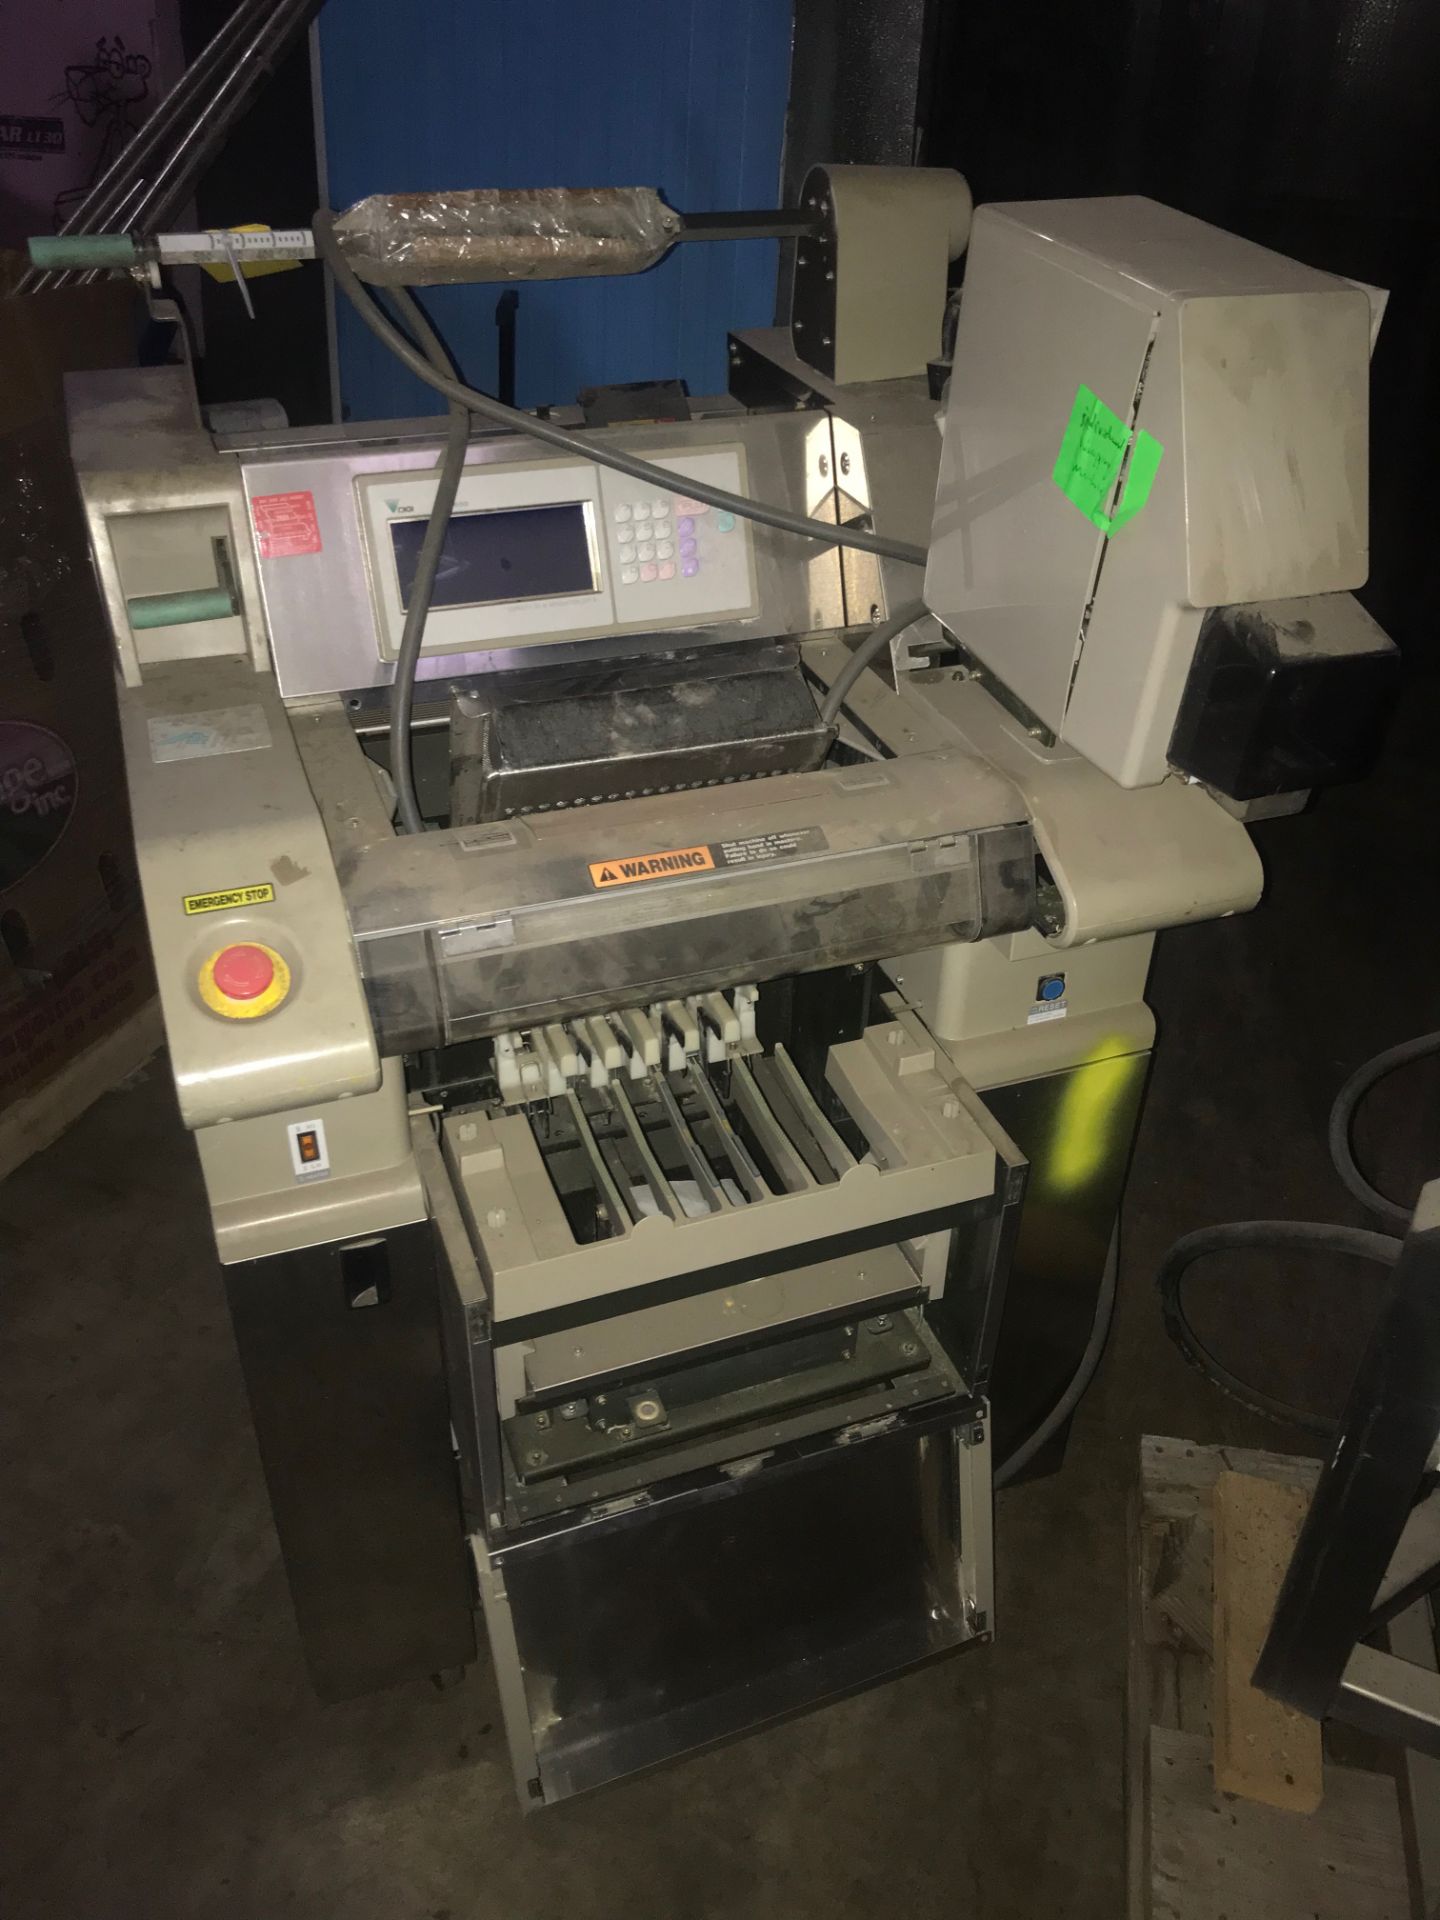 Teraoka Semi-Automatic Individual Weigh/ Wrapping Machine, Model# FX-3600, Serial# 97161909, 208/240 - Image 2 of 5